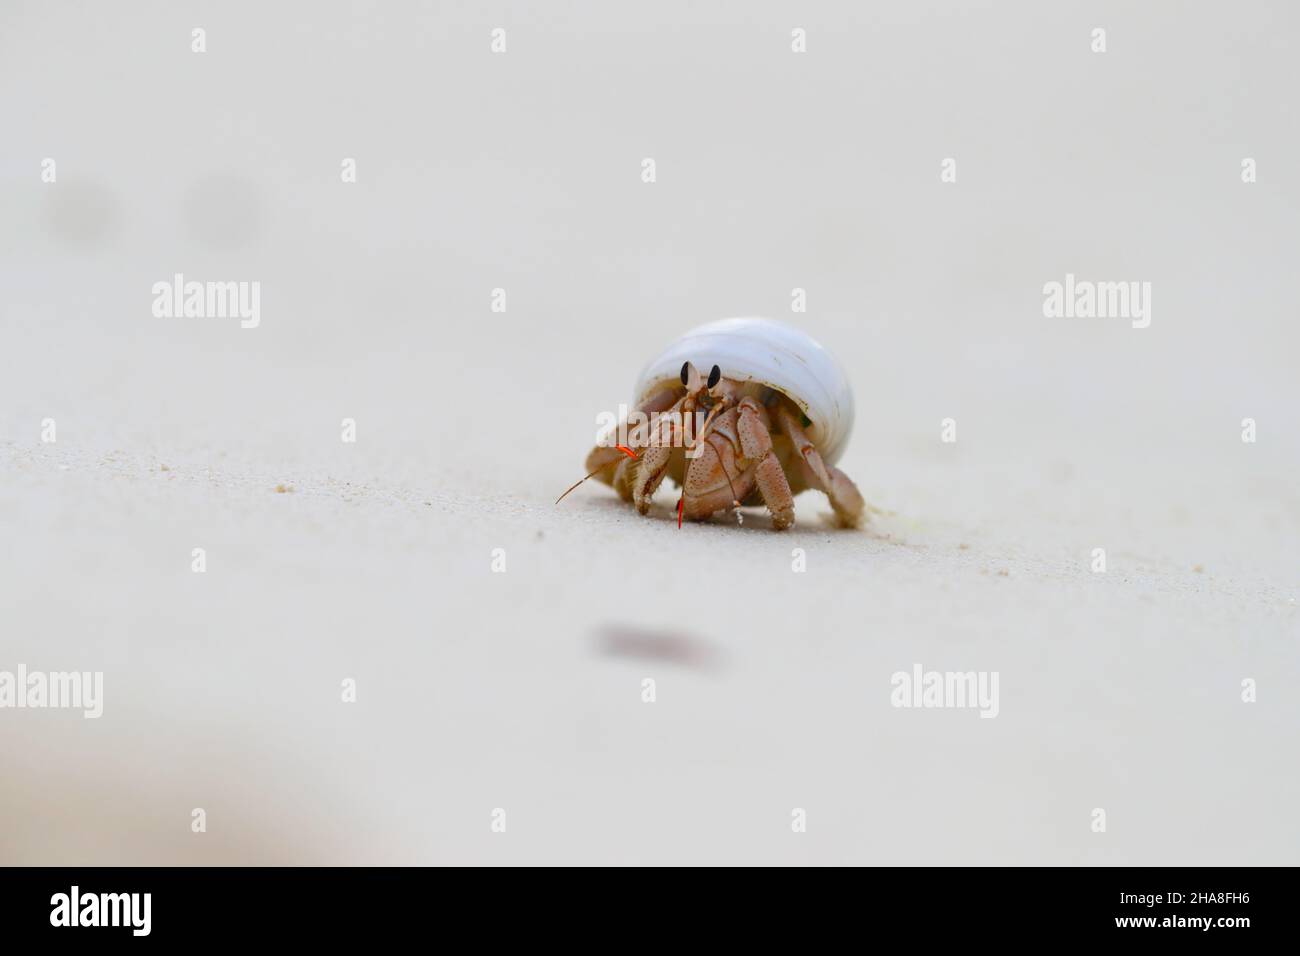 Coenobita perlatus, a species of terrestrial hermit crab known as strawberry hermit crab, on Cosmoldeo atoll in the Seychelles Stock Photo